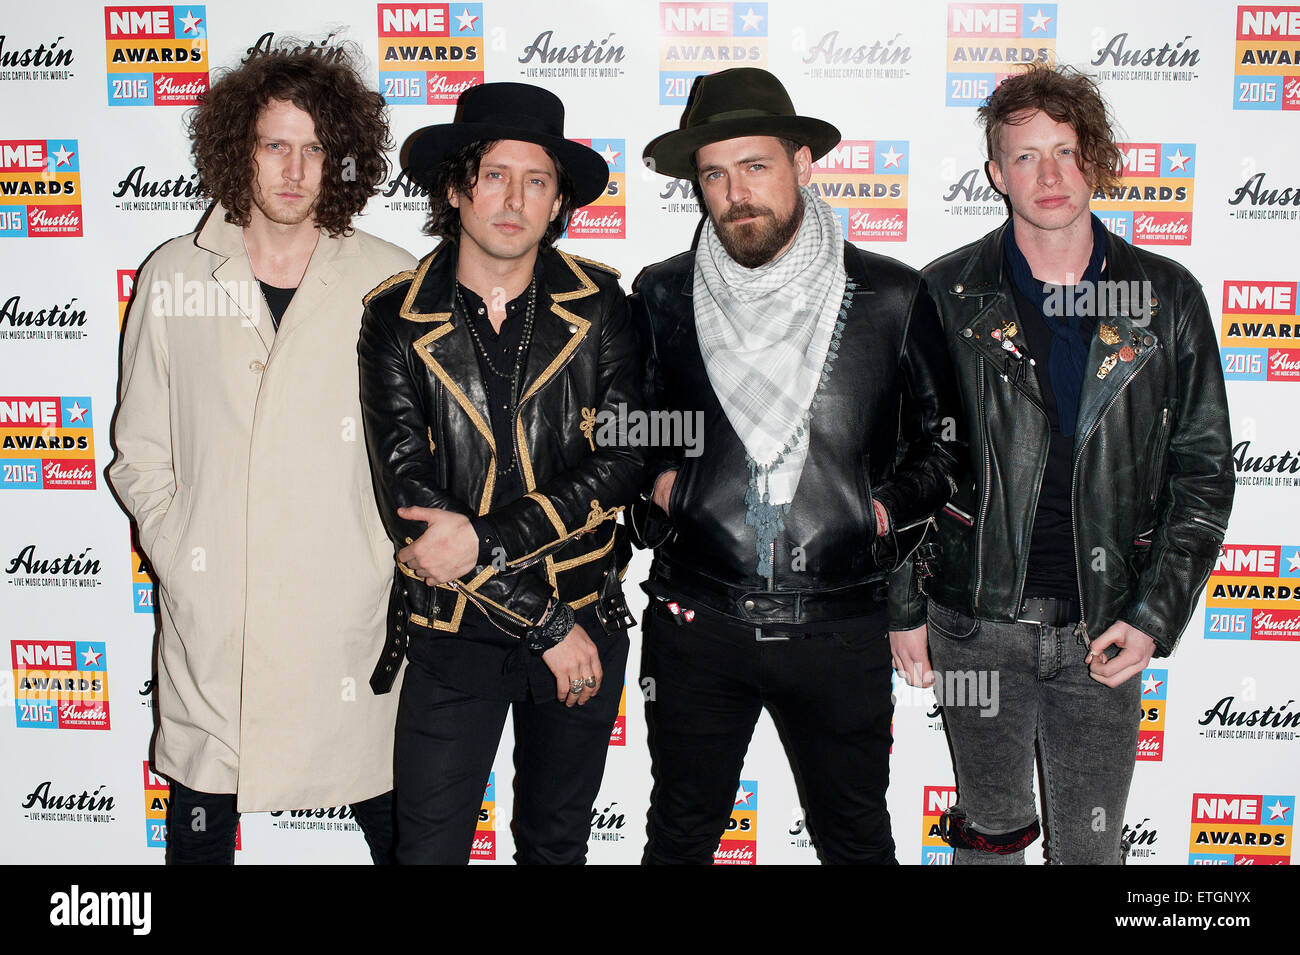 NME Awards held at the Brixton Academy - Arrivals.  Featuring: The Jackals Where: London, United Kingdom When: 18 Feb 2015 Credit: Daniel Deme/WENN.com Stock Photo